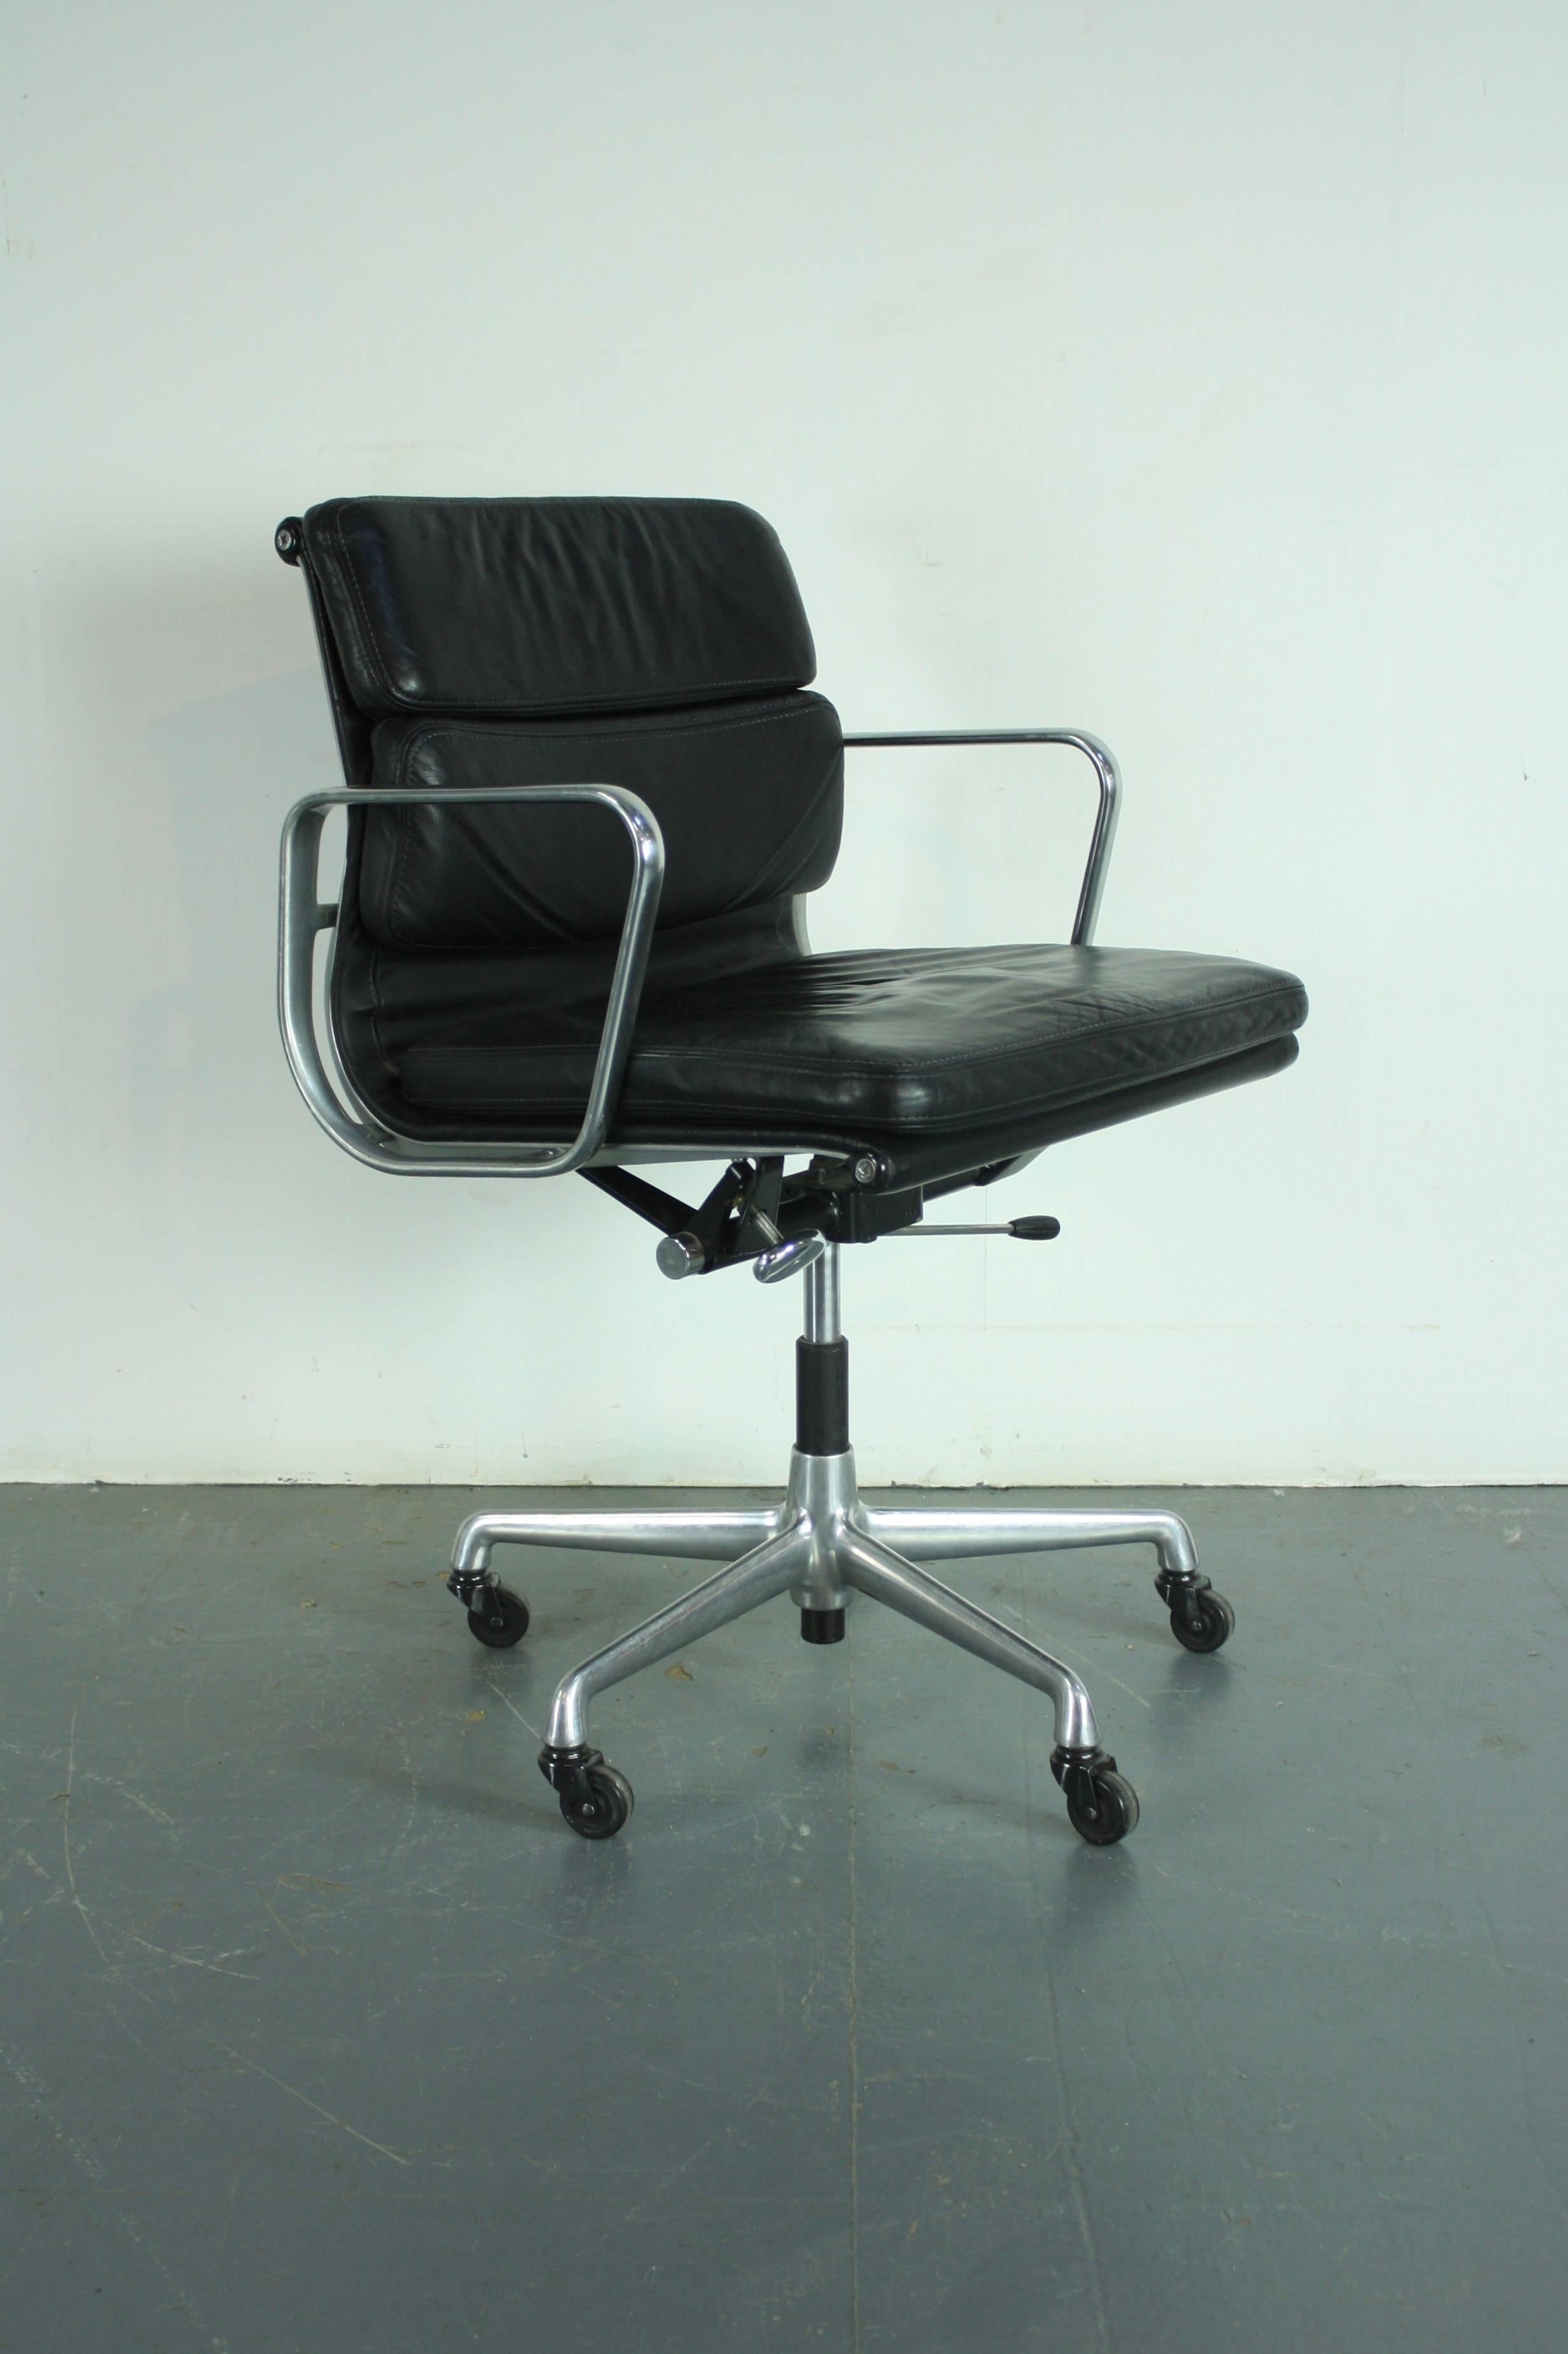 Beautiful vintage black leather soft pad Aluminium Group chair designed by Charles and Ray Eames for Herman Miller in the 1960s. This one was made in the 1980s.

In good vintage condition. There is some age-related wear to the leather but nothing